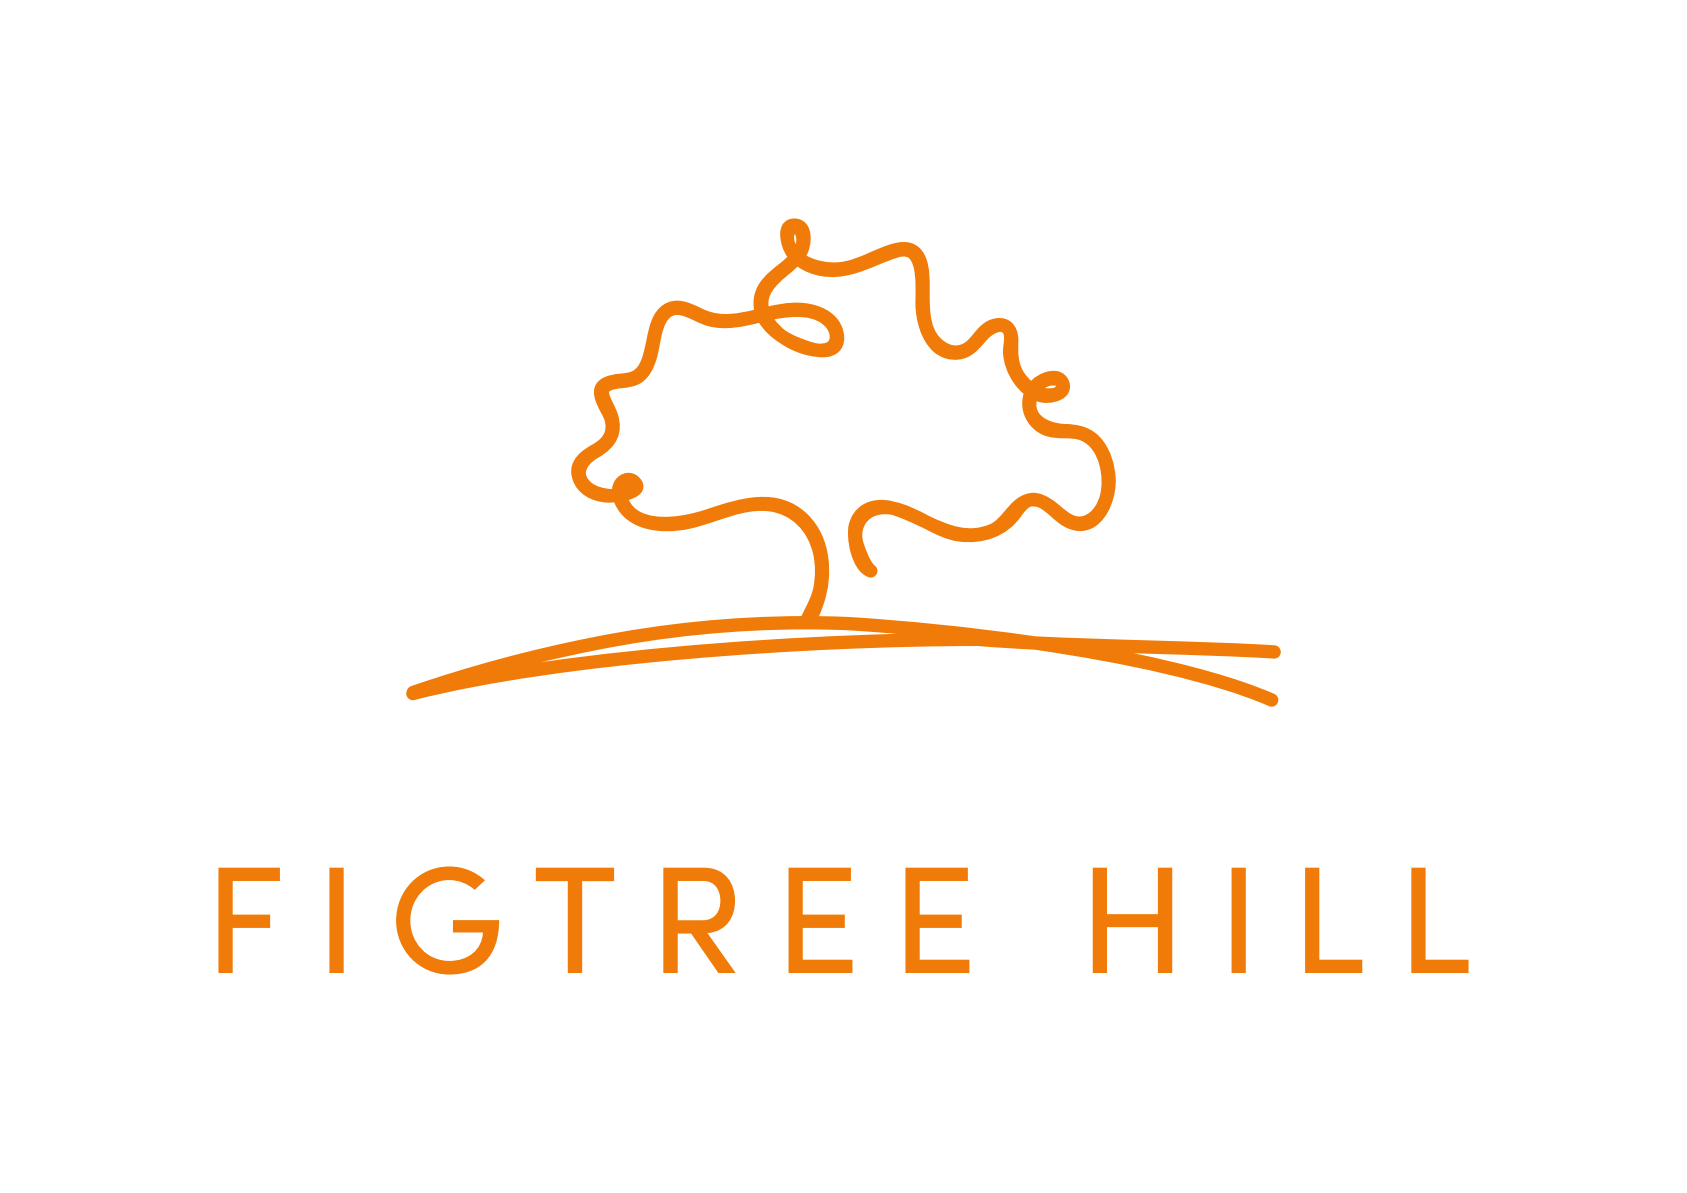 Figtree Hill - Lendlease NSW